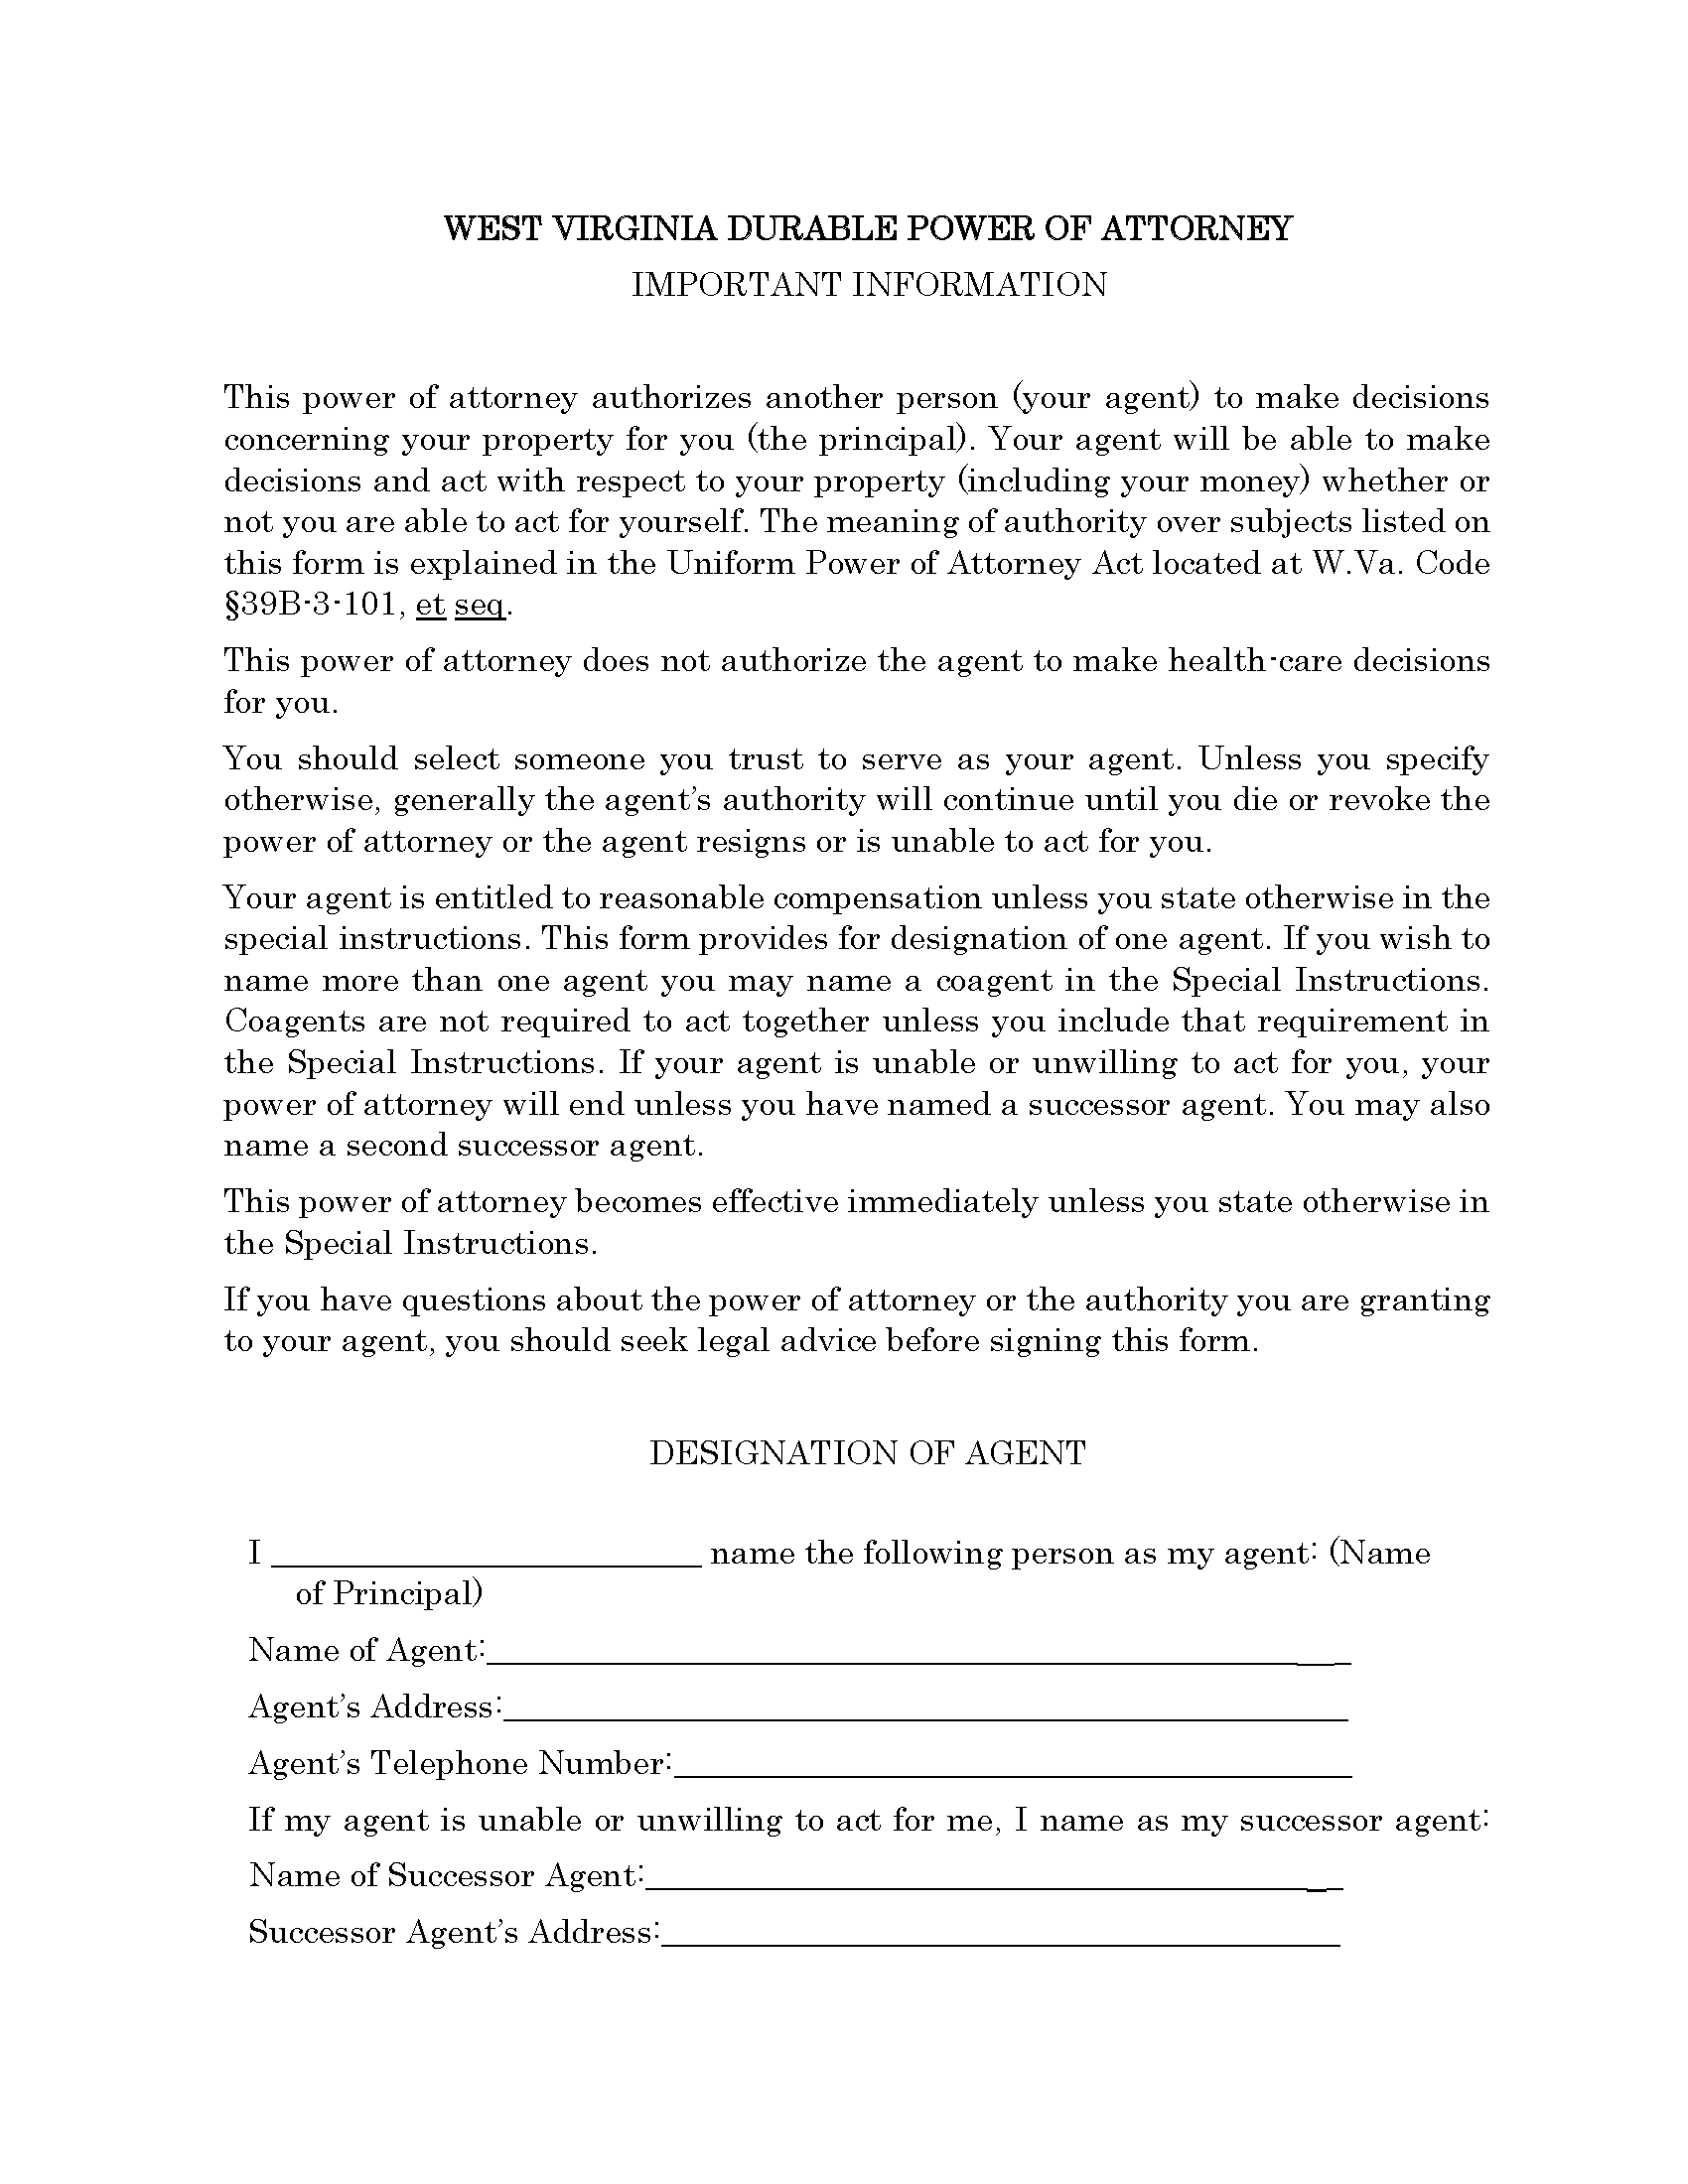 West Virginia Durable Power of Attorney Form - Fillable PDF - Free Printable Legal Forms